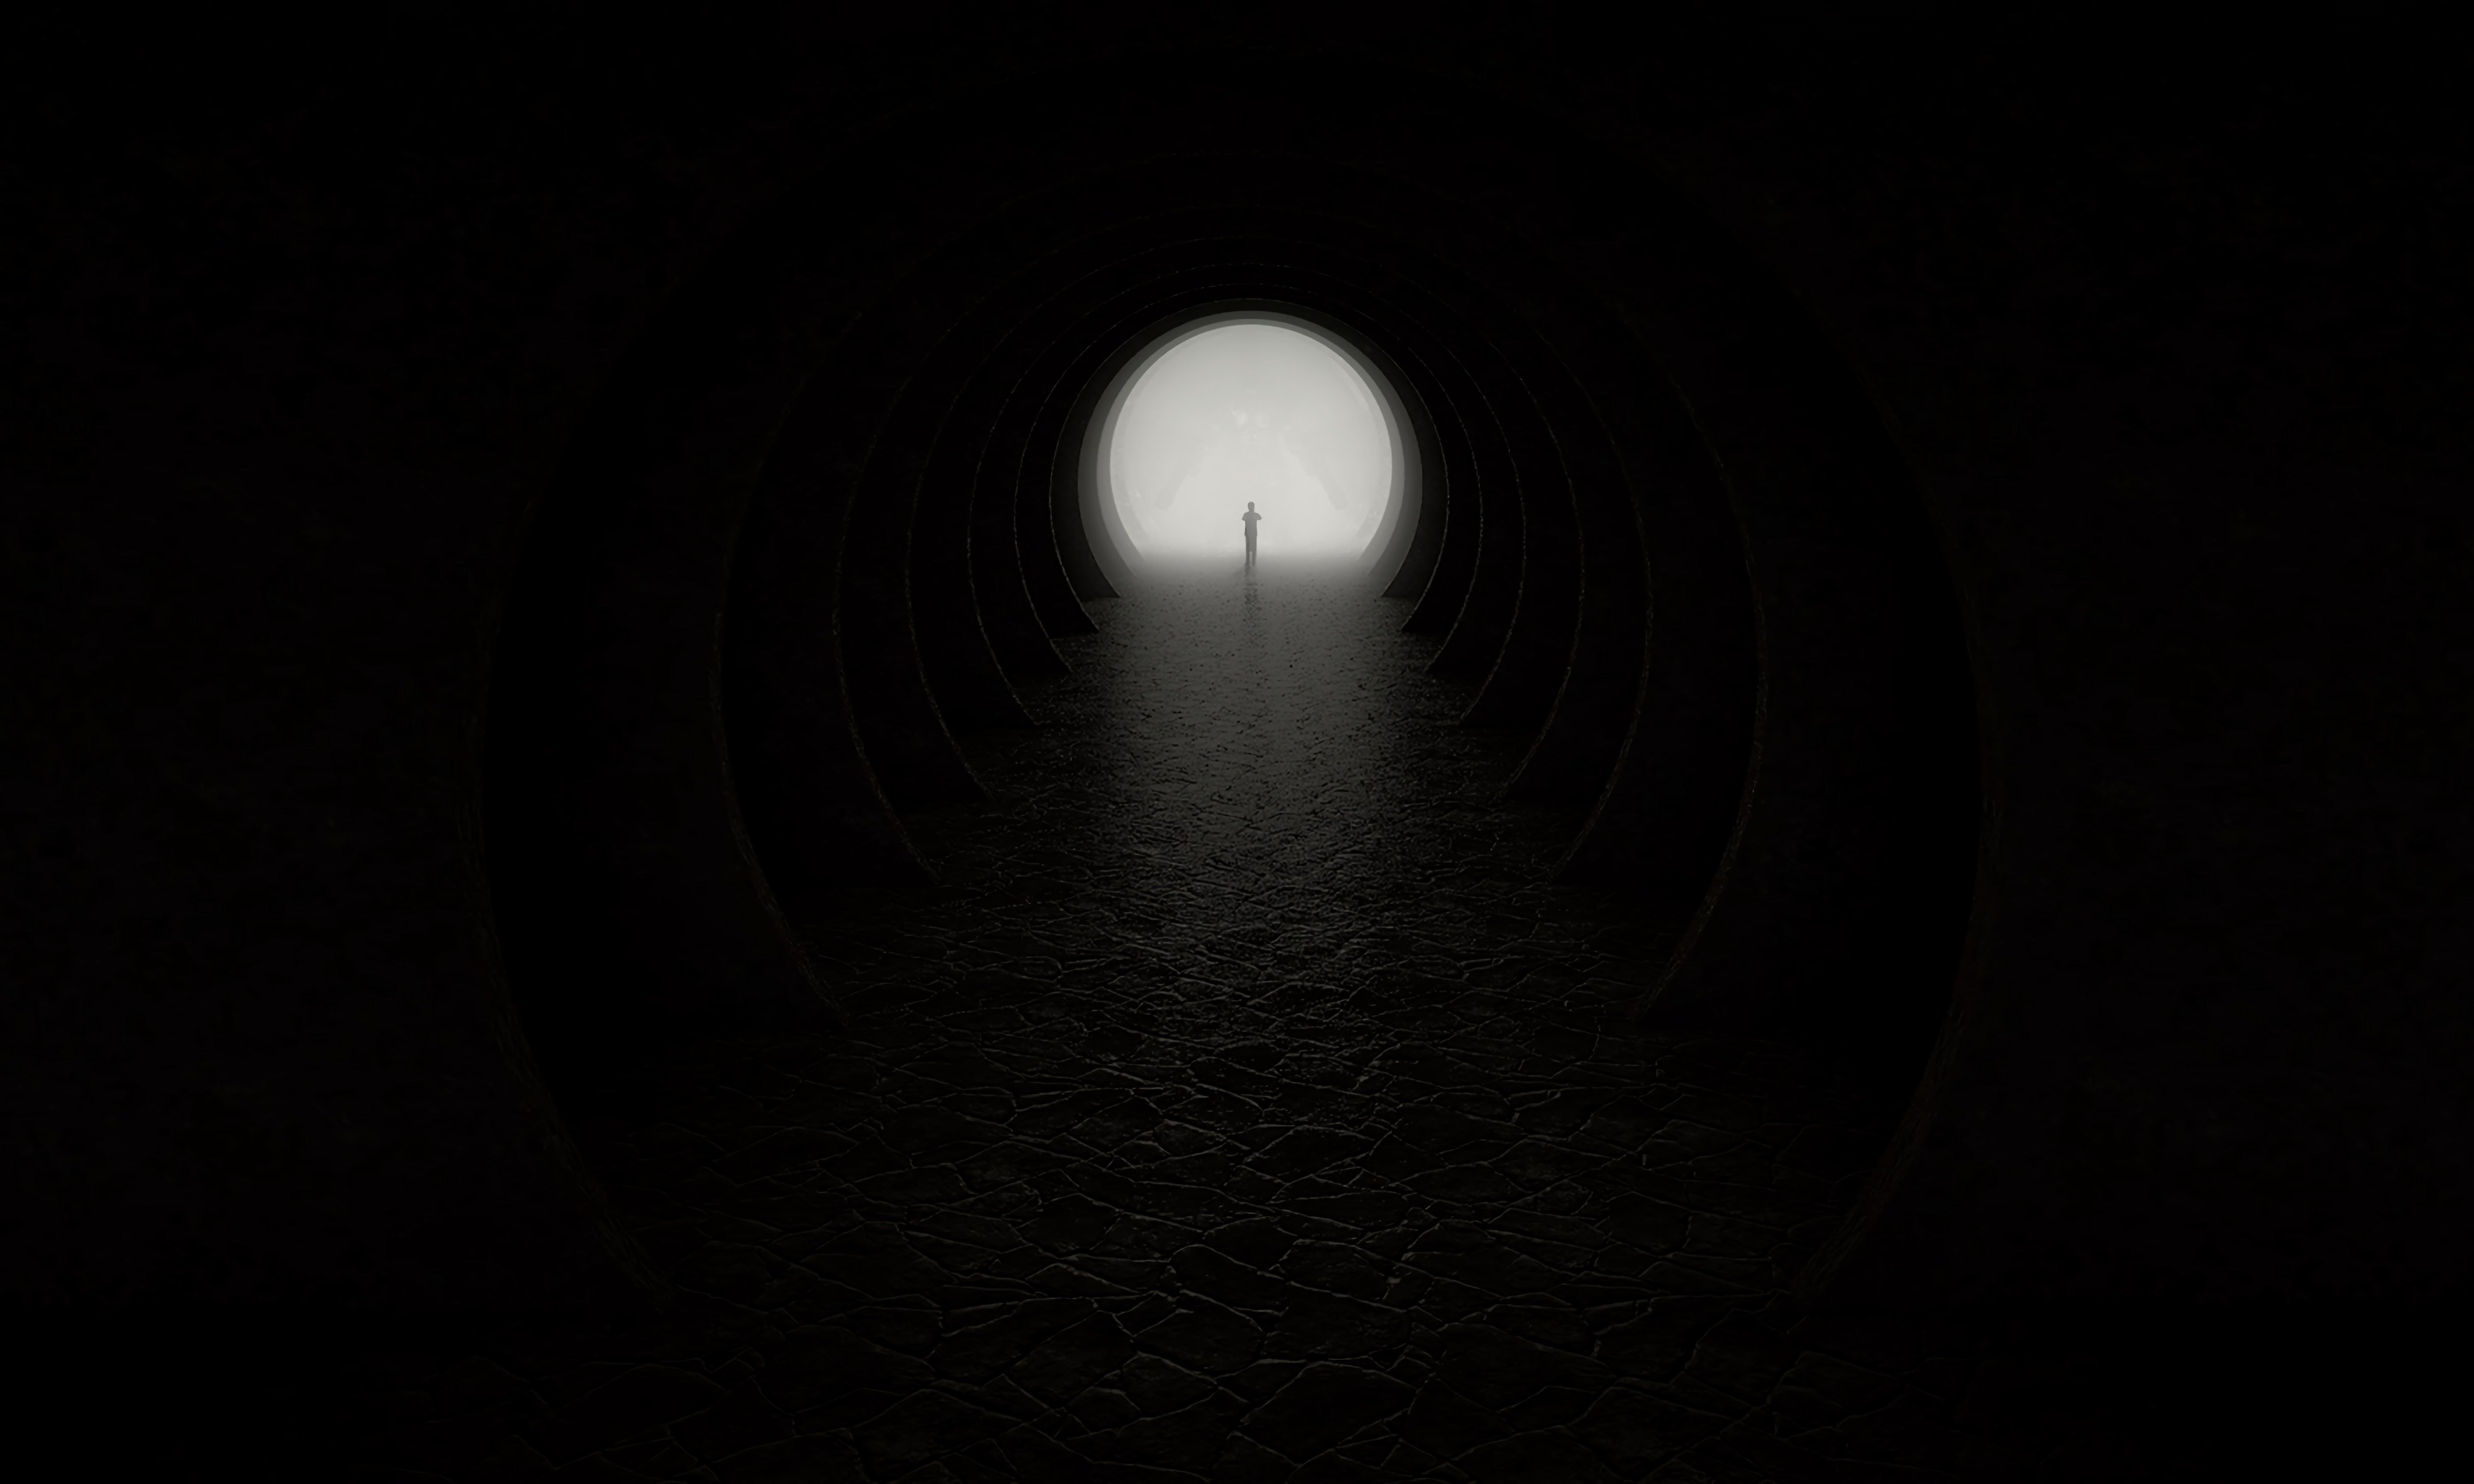 output, exit, silhouette, black, darkness, circle, cave